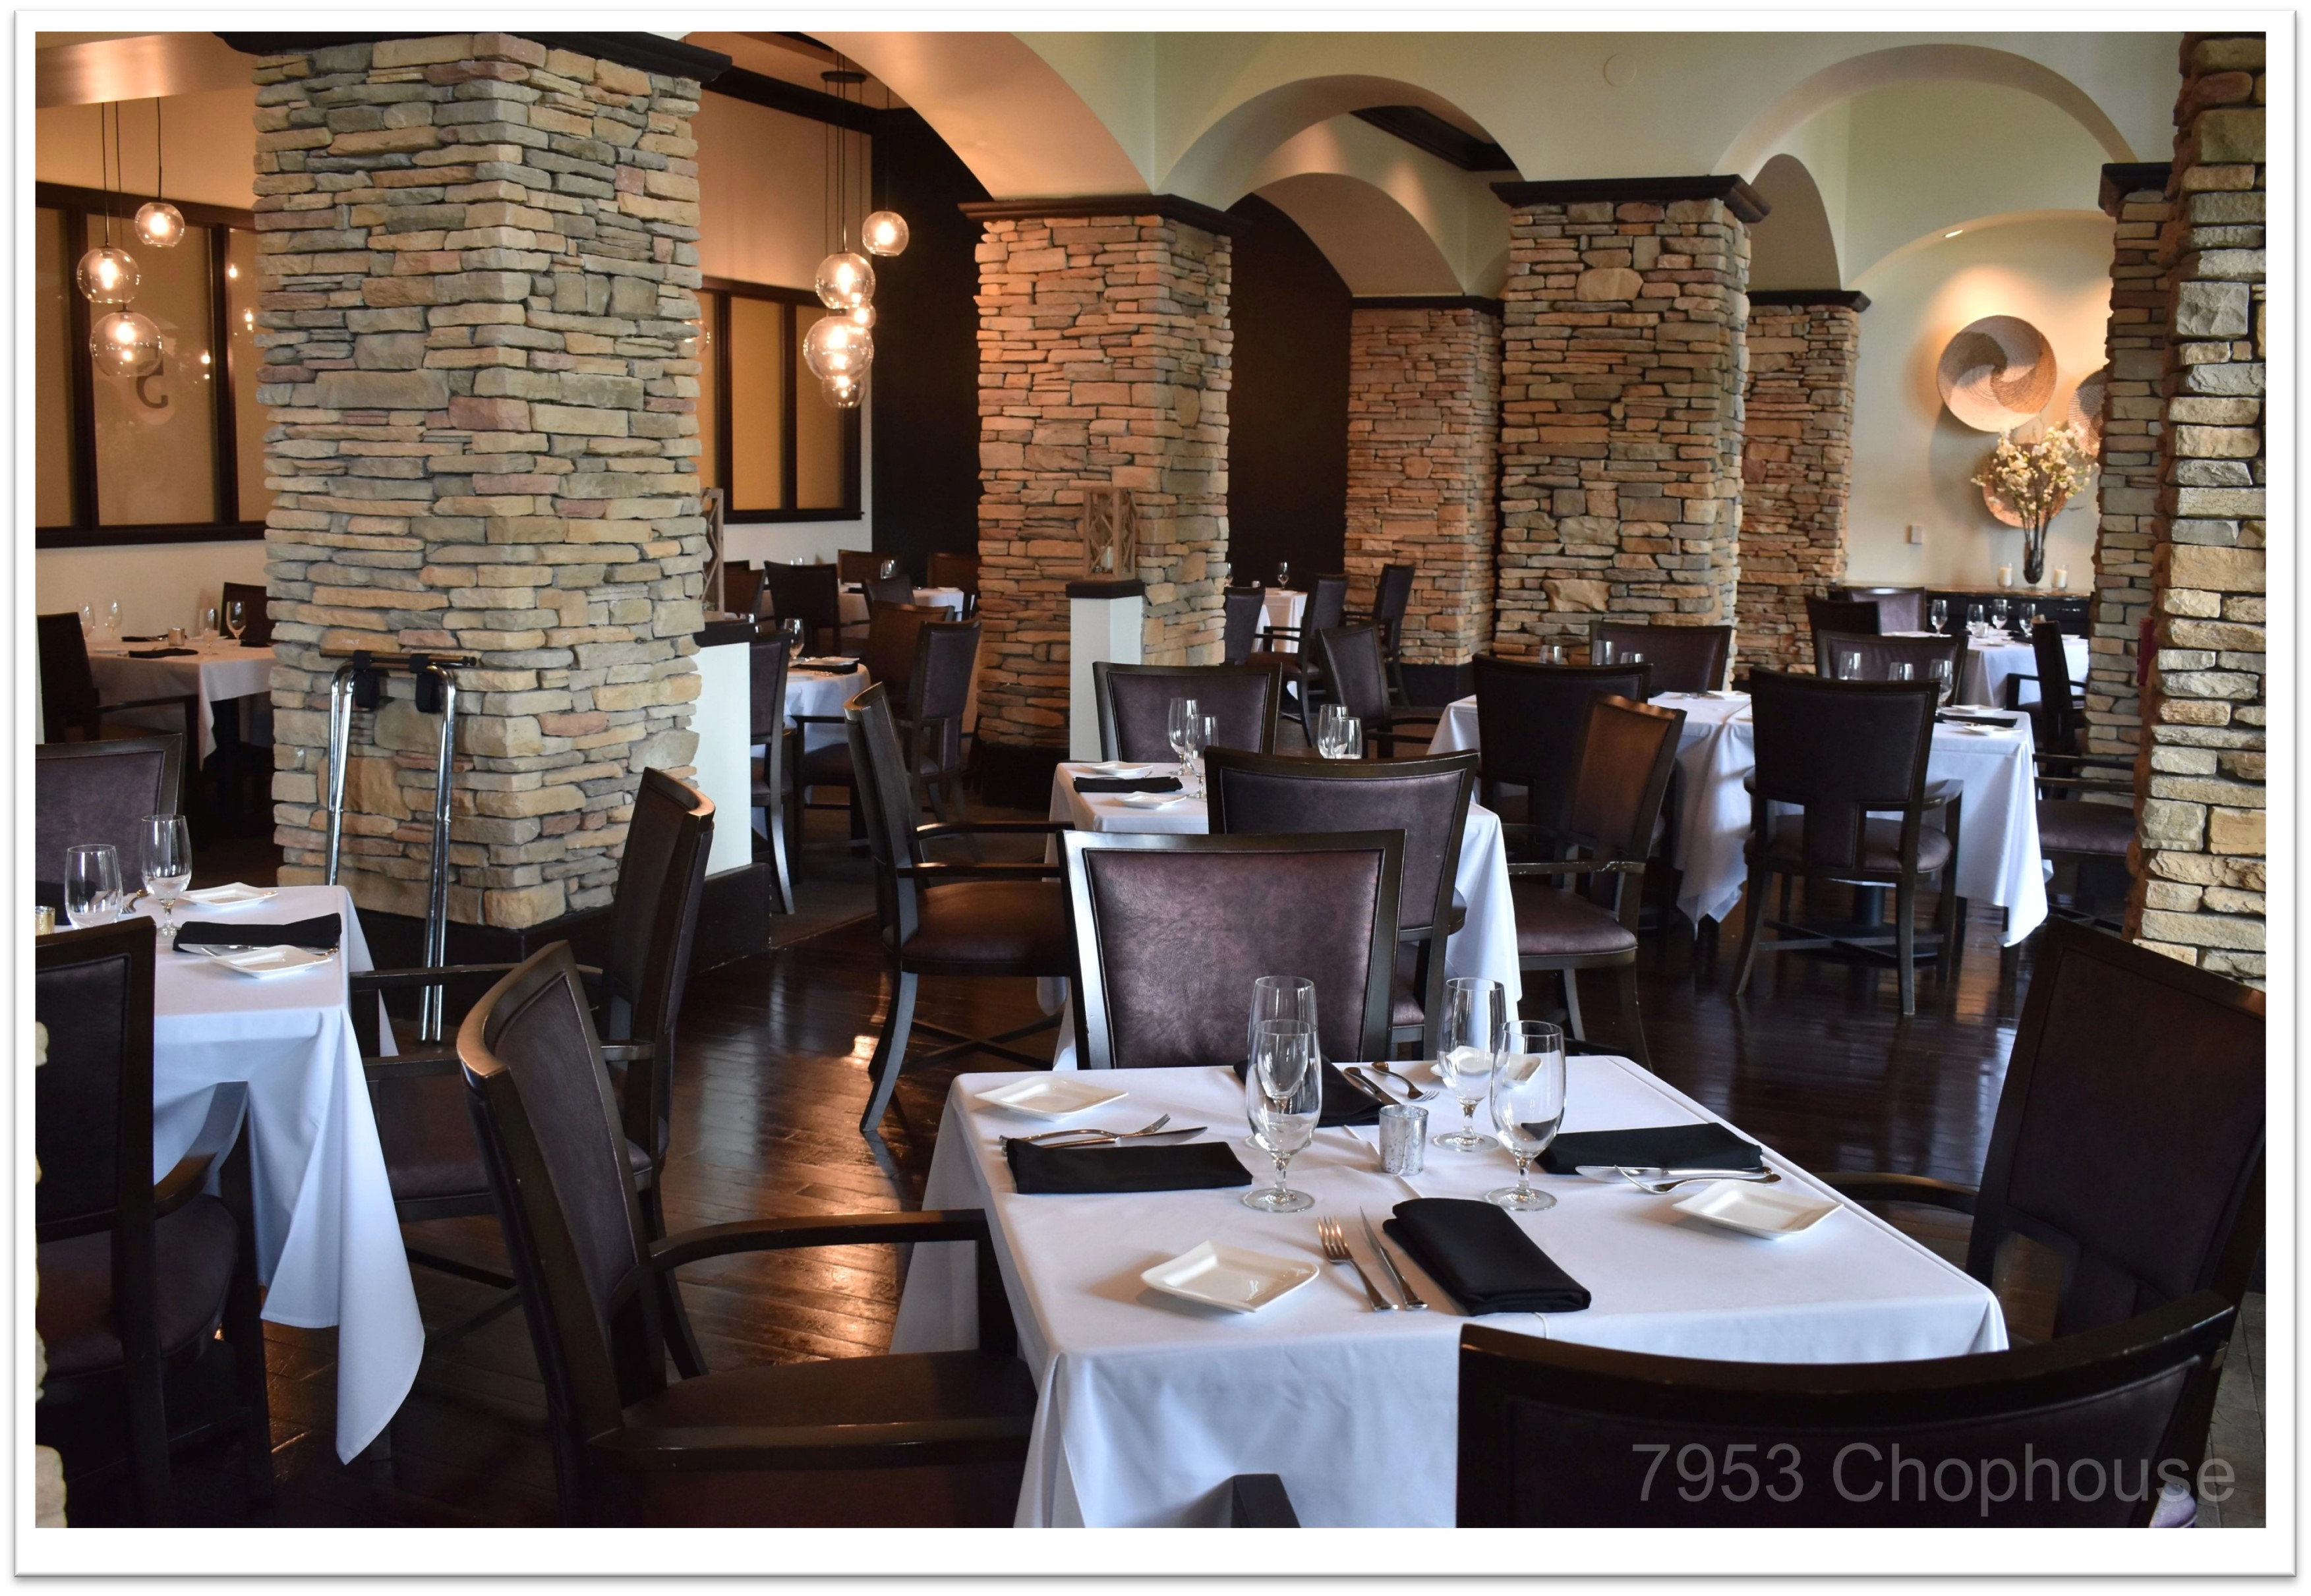 7953 Chophouse, a participating restaurant in Visit Orlando's Magical Dining program. 